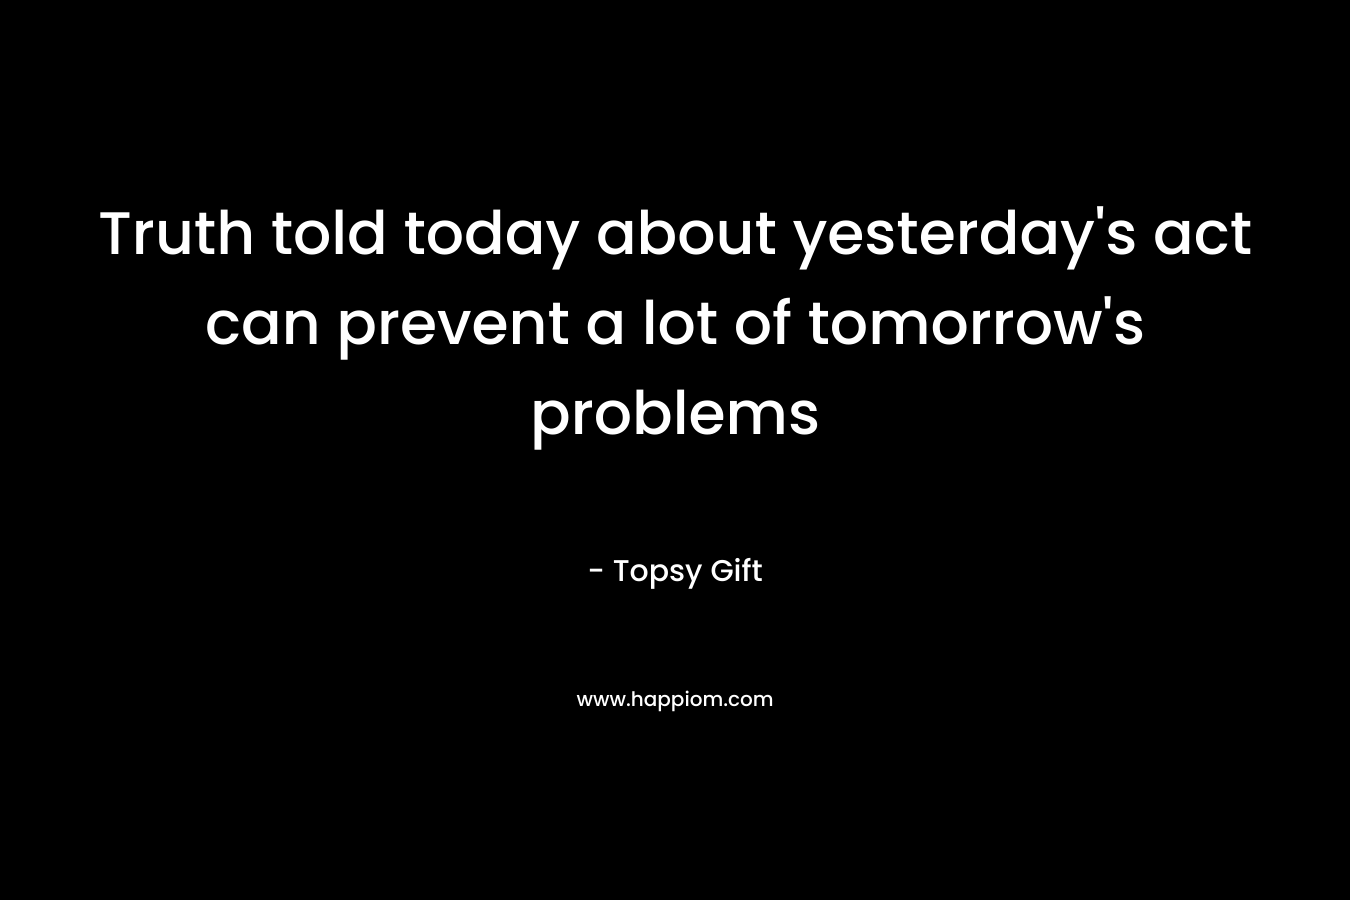 Truth told today about yesterday's act can prevent a lot of tomorrow's problems